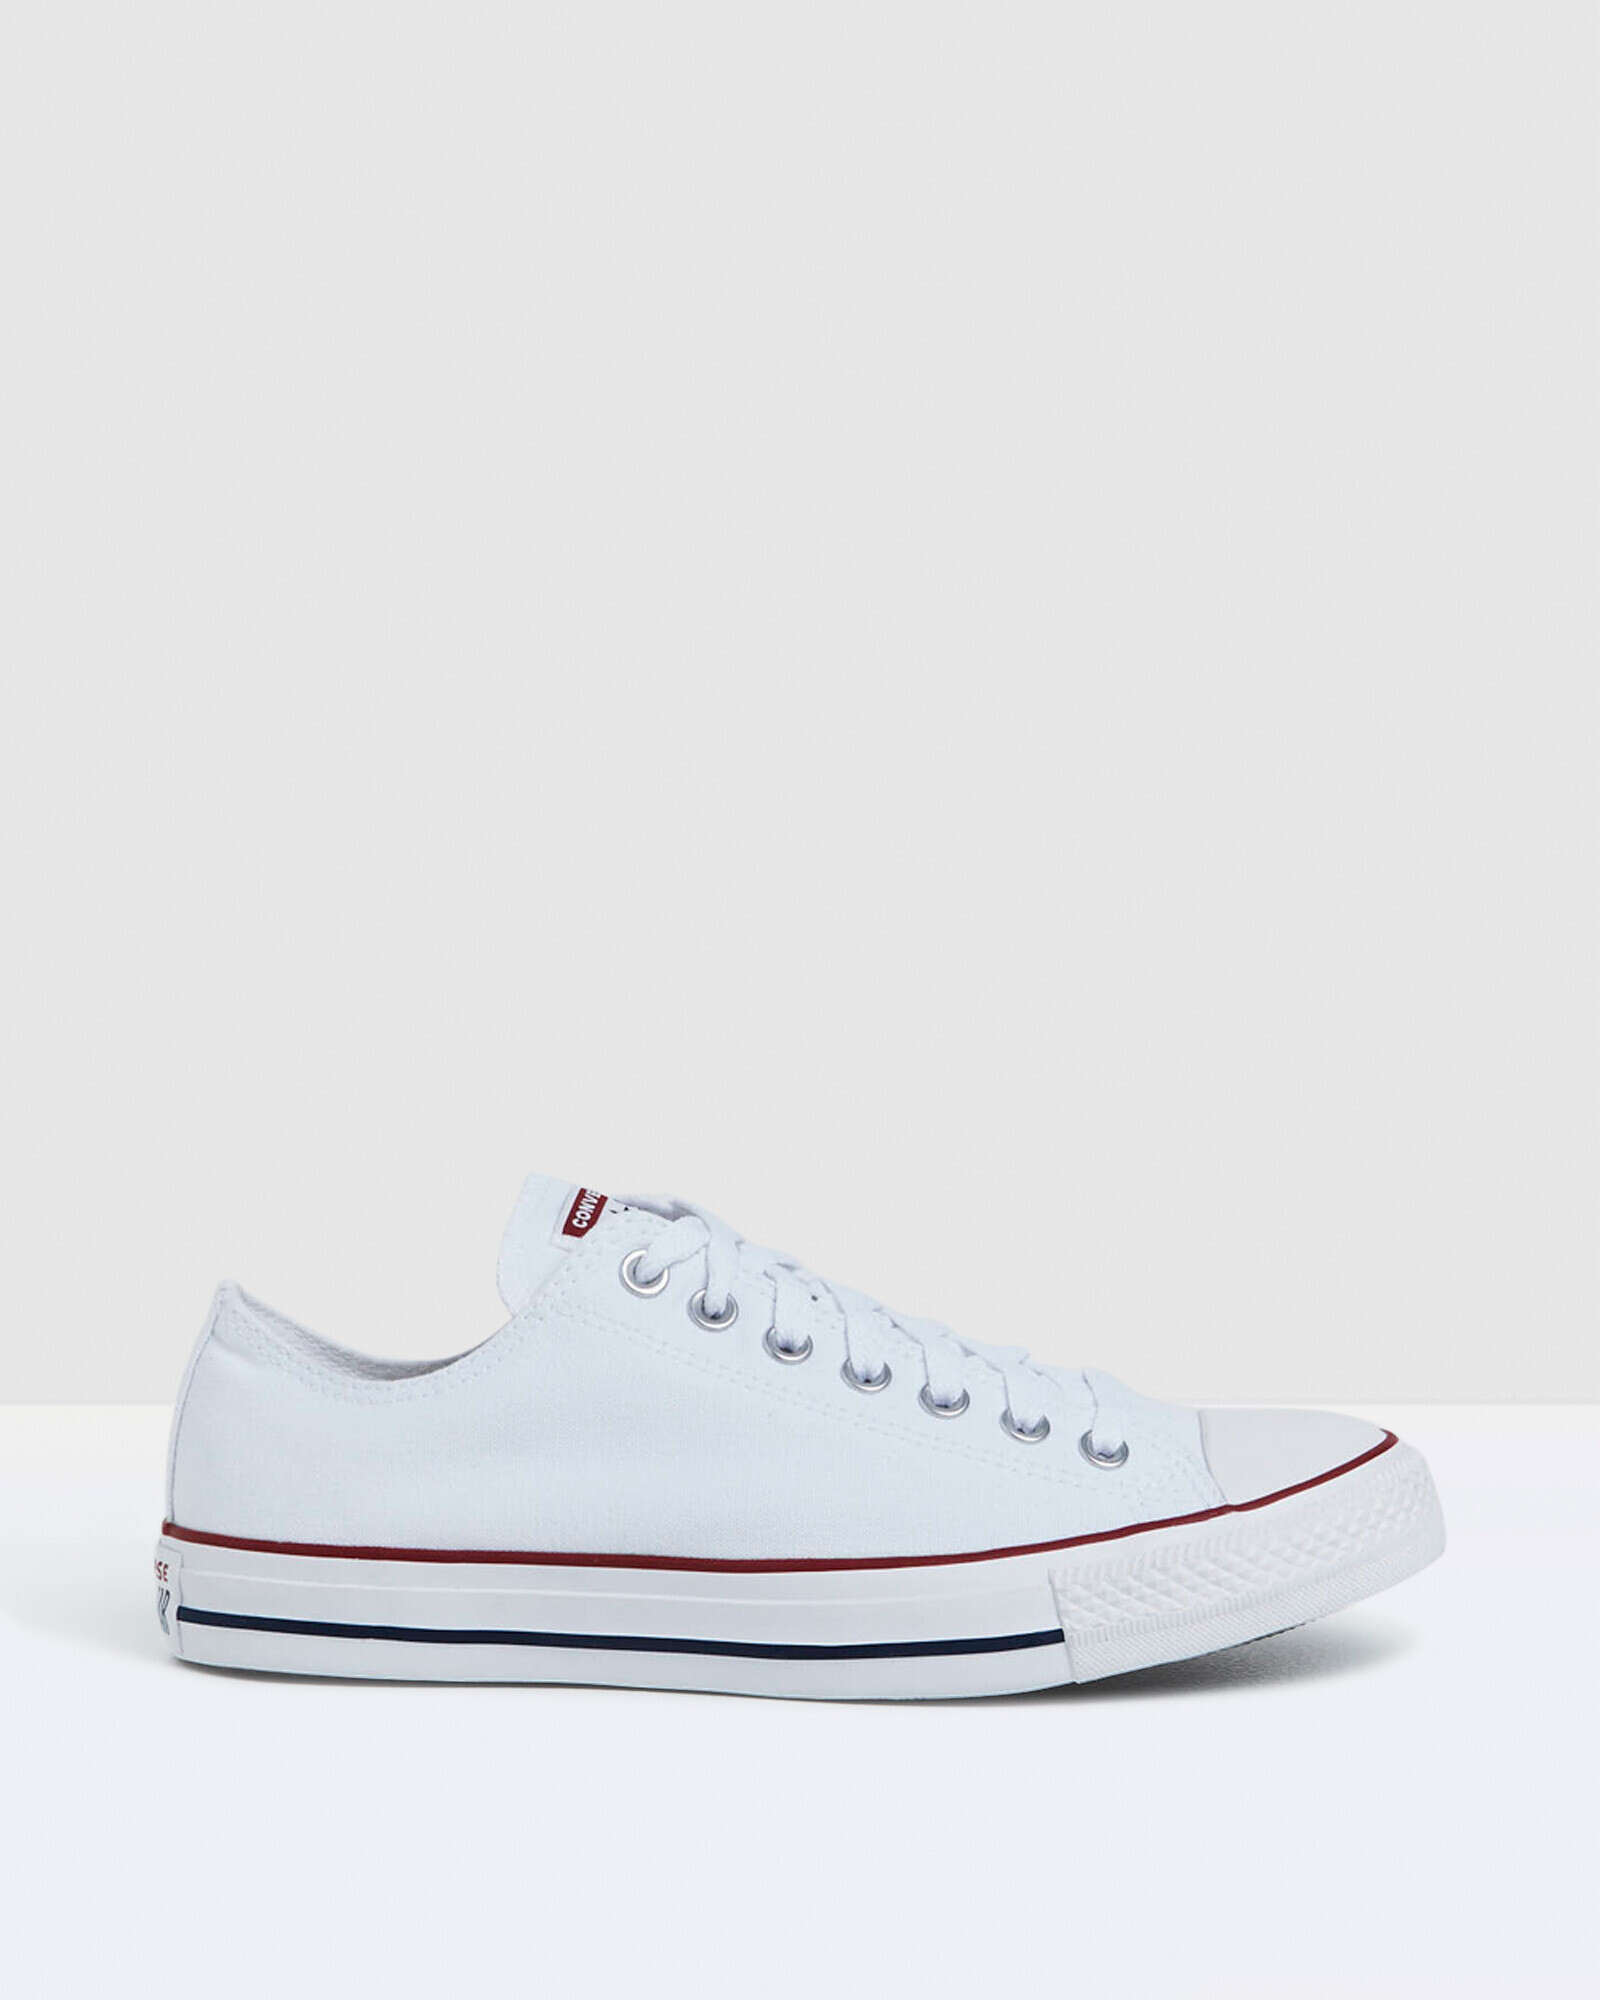 mens converse low tops white